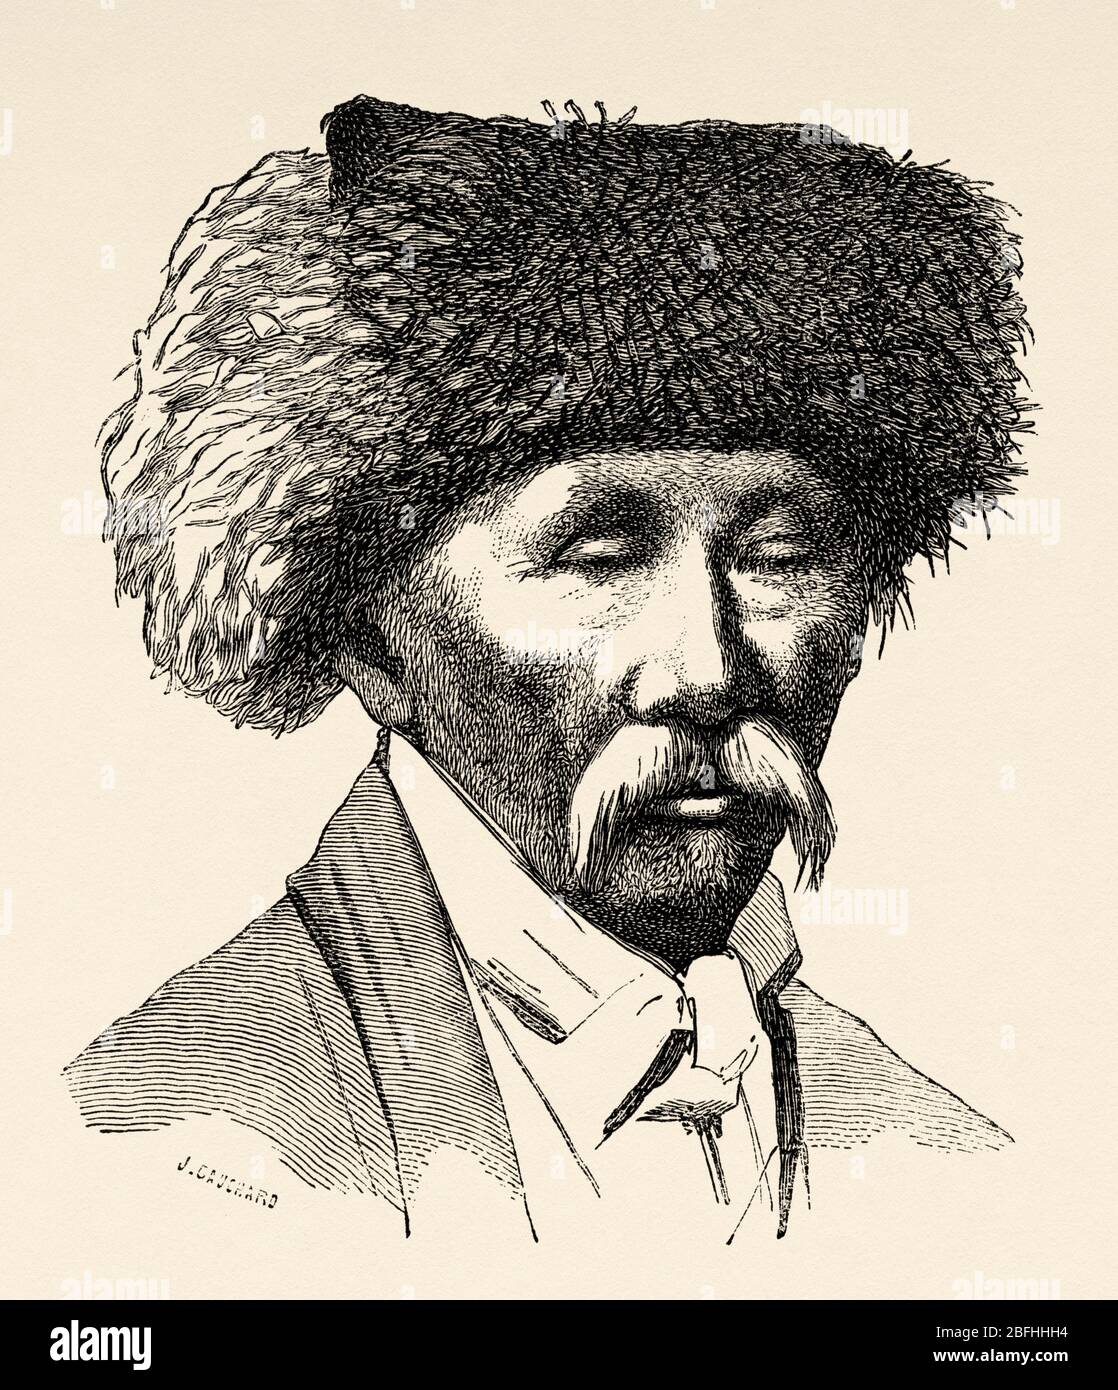 Portrait of an old Cossack man, Russia. Old engraving illustration, Travel to Free Russia 1869 by William Hepworth Dixon Stock Photo